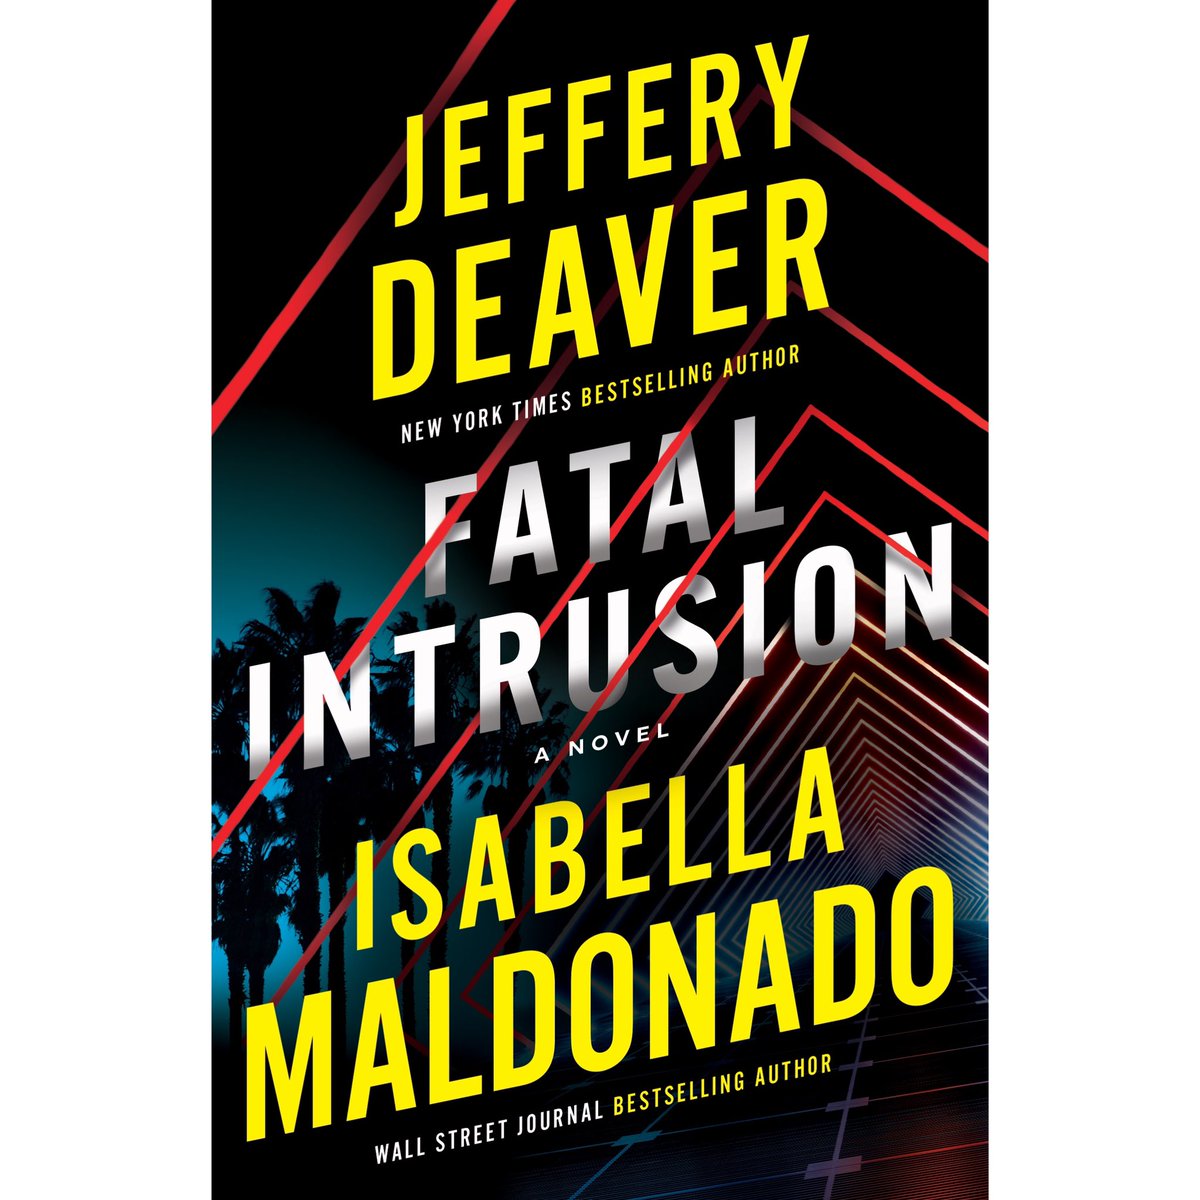 FATAL INTRUSION is now coming out on September 1 instead of in August. This is the first book in a new series. Get the details here: jefferydeaver.com/novel/fatal-in…